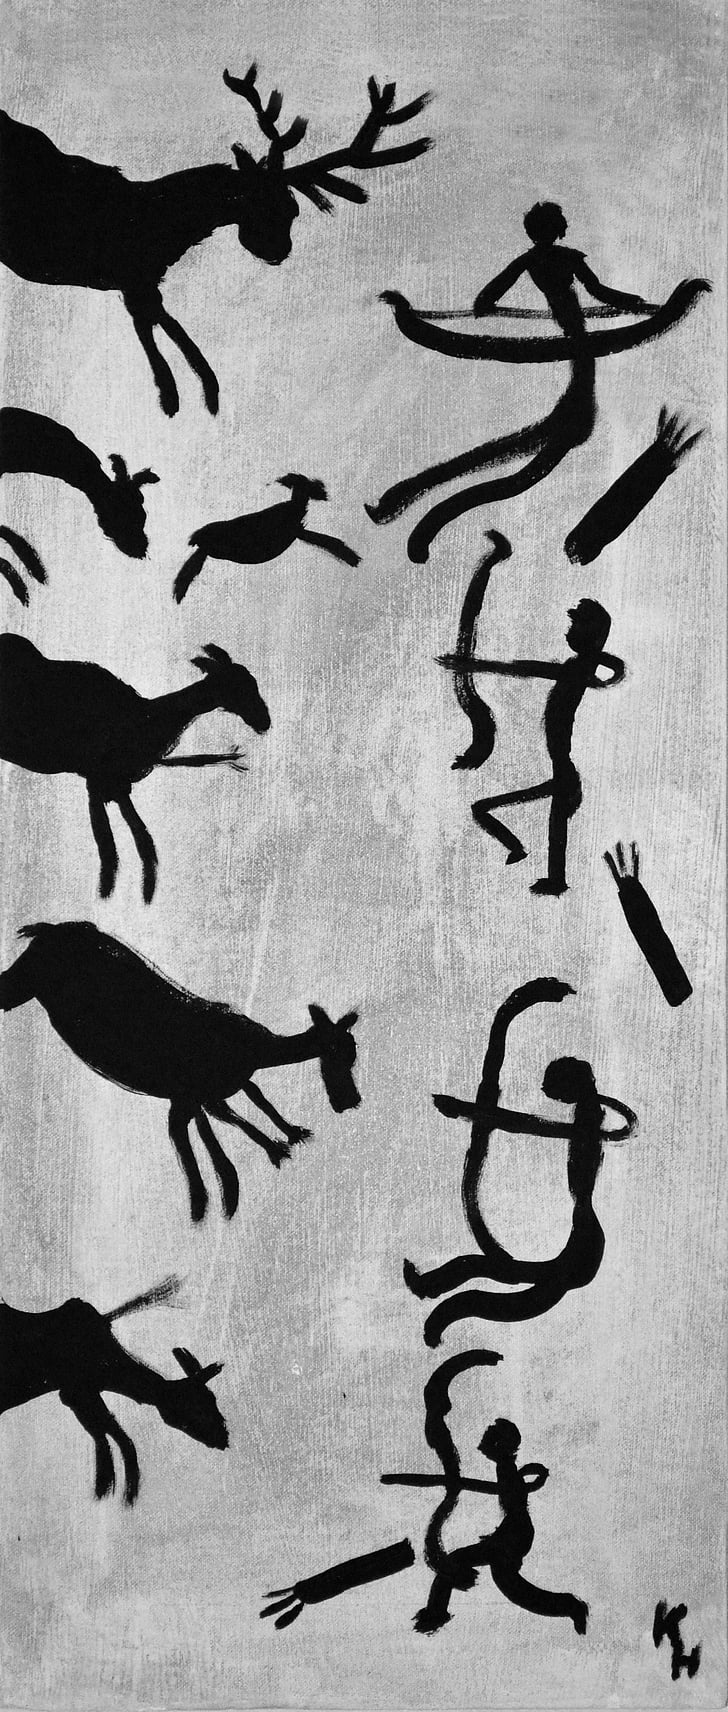 hunting, battue, stone age, cave paintings, modeled after, steinzeitmalelerei, archaic